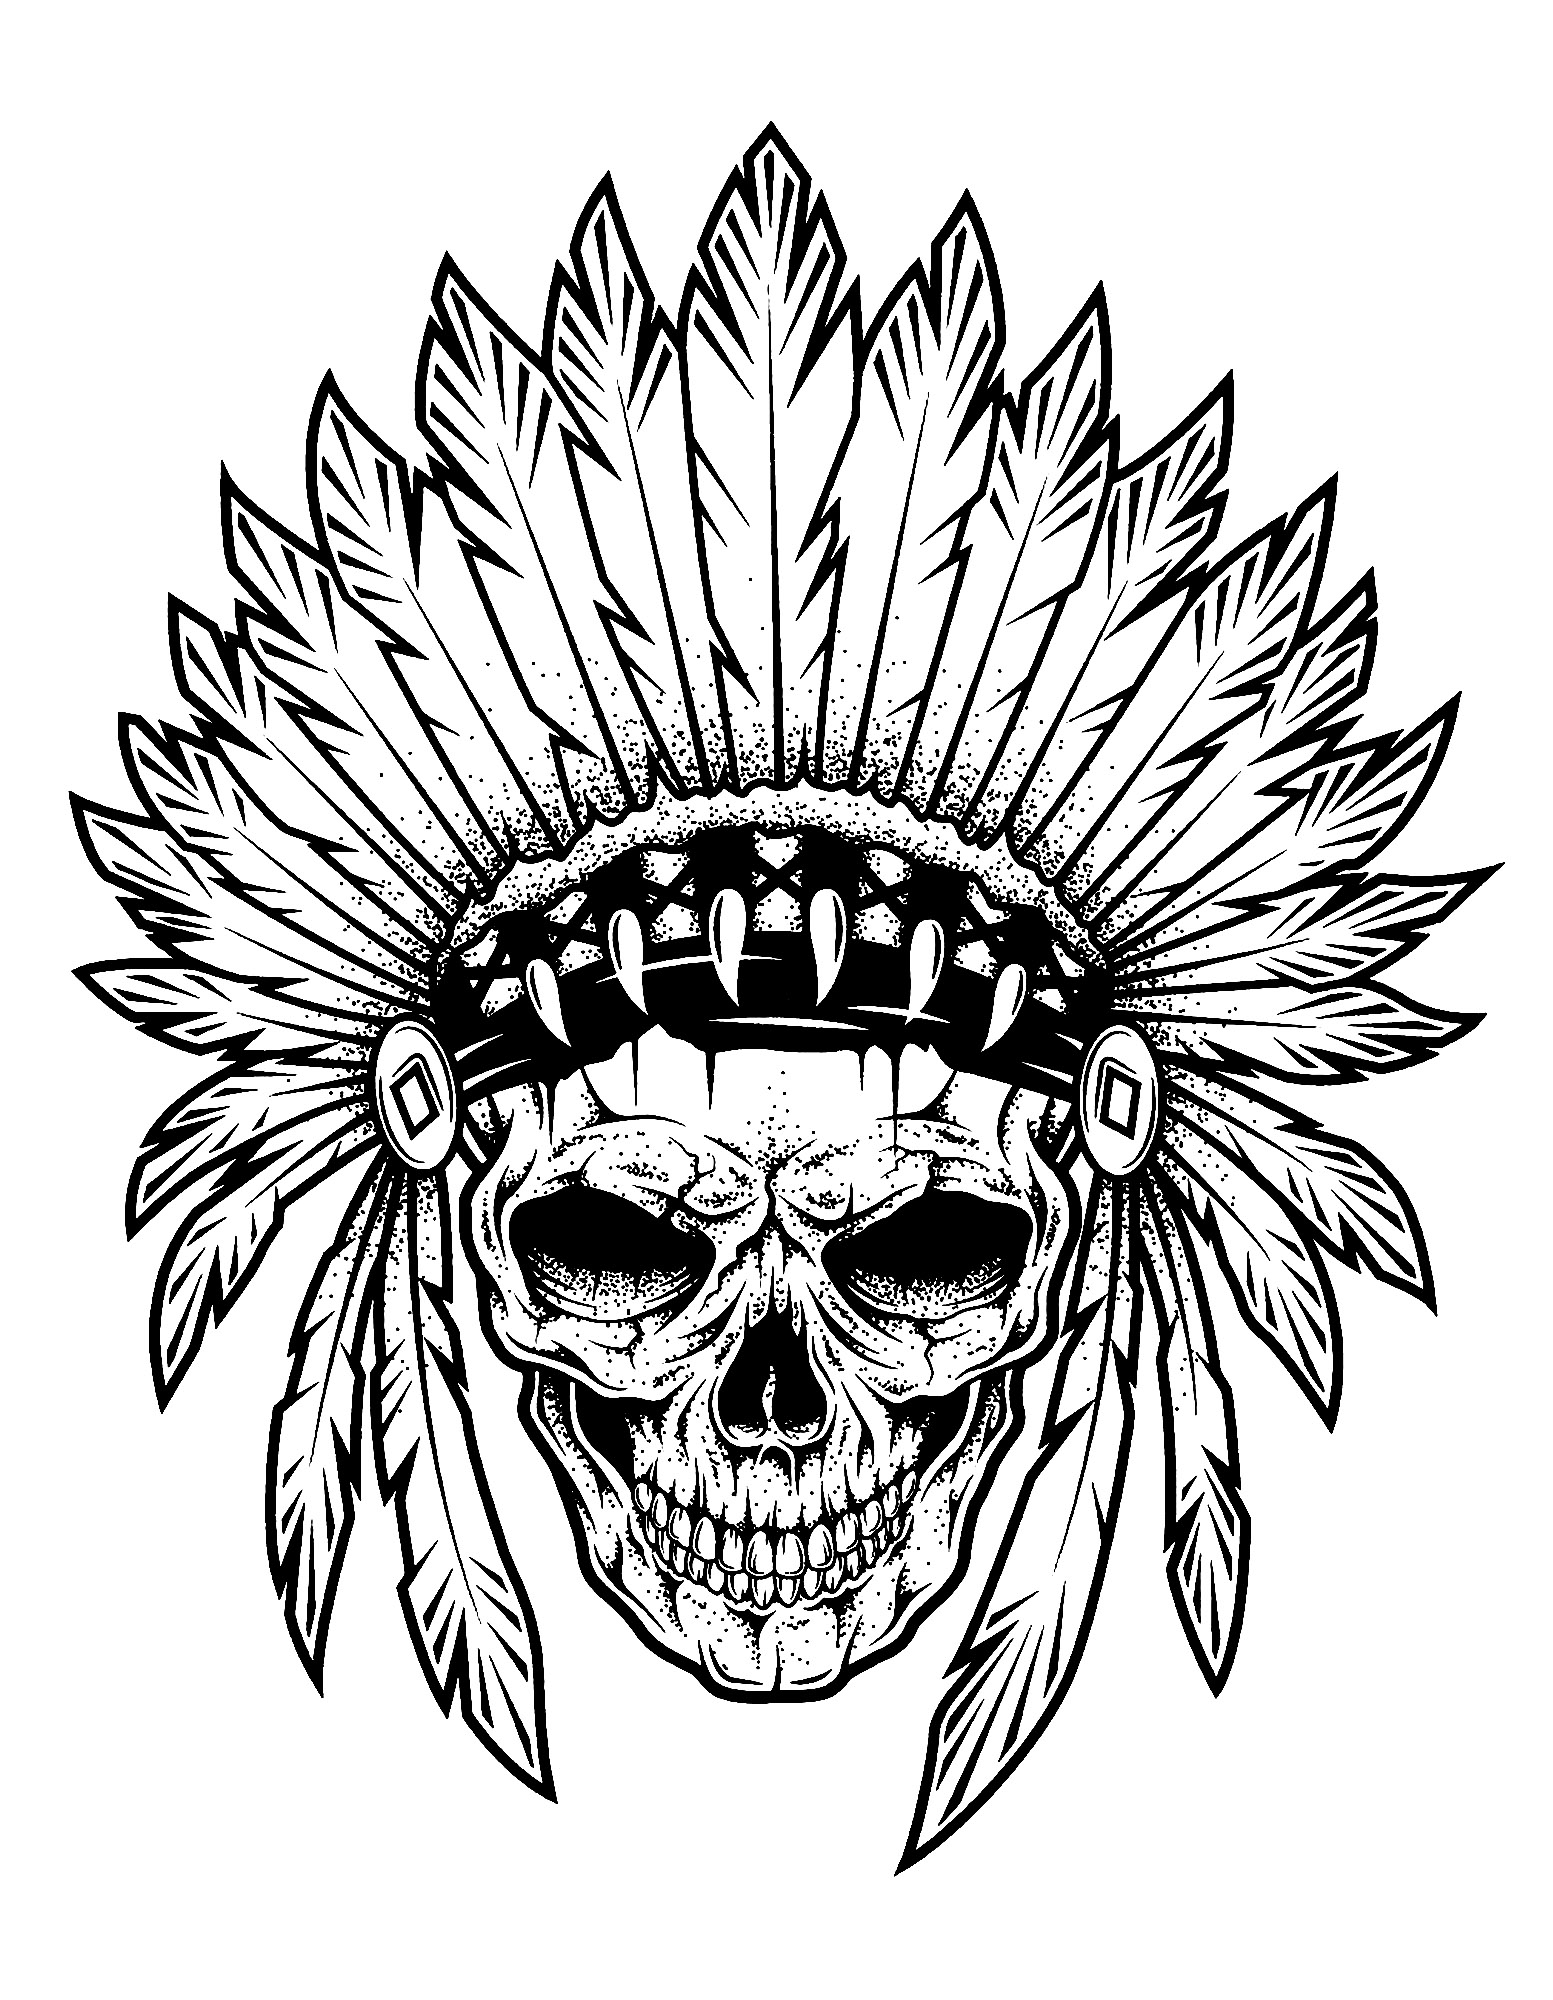 Download Indian chief skull - Native American Adult Coloring Pages